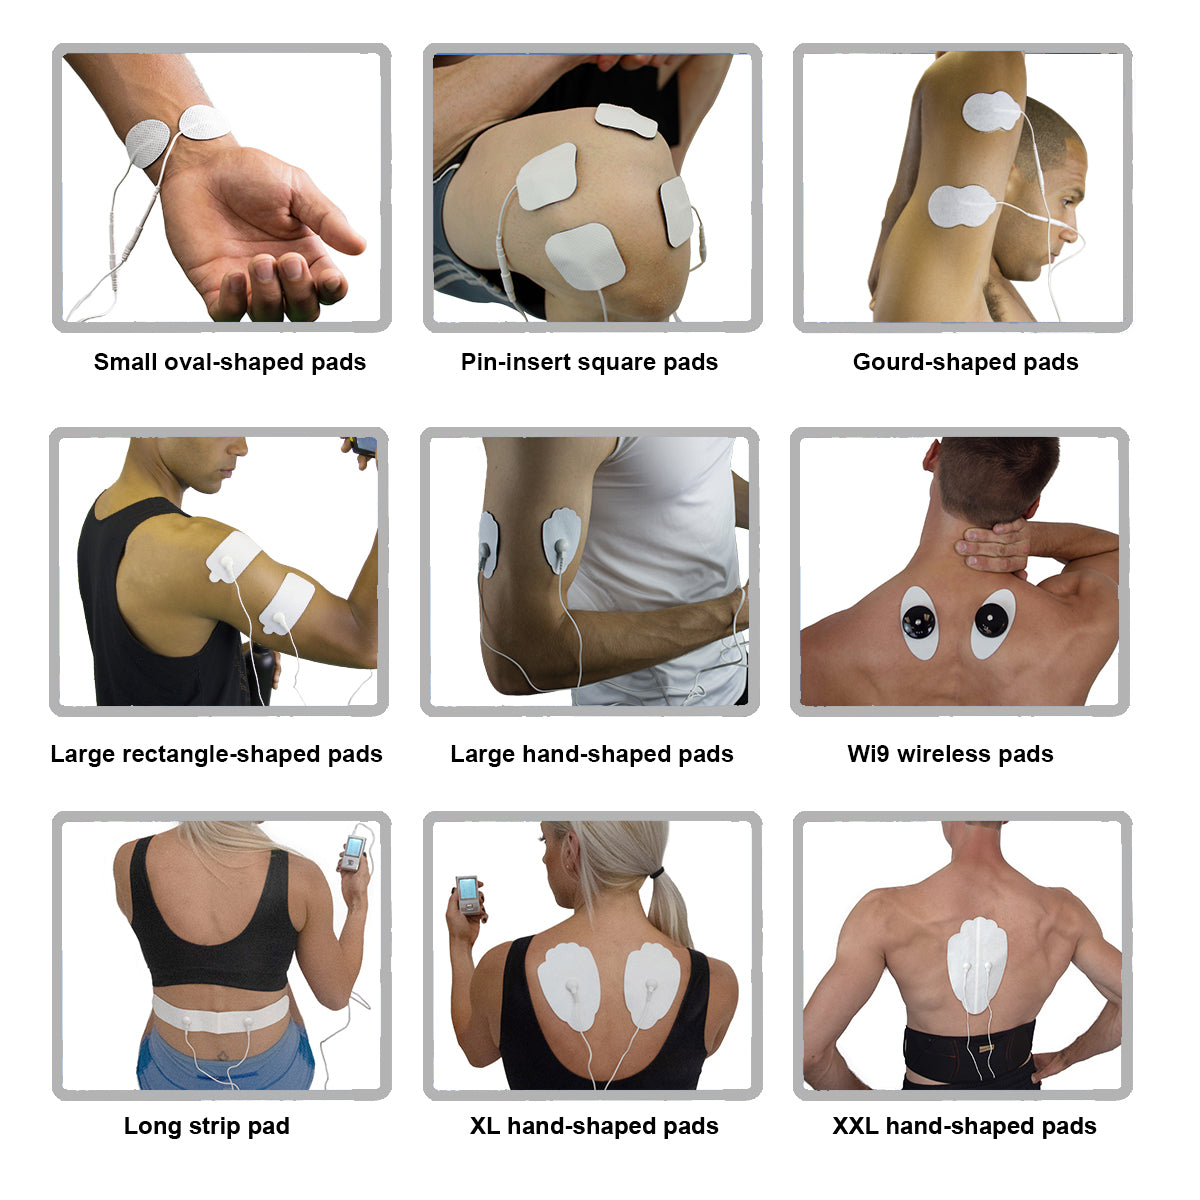 5 Pcs White XXL Hand-Shaped Pin inserted electrode patches pads for pain relief TENS & Muscle Stimulator - HealthmateForever.com